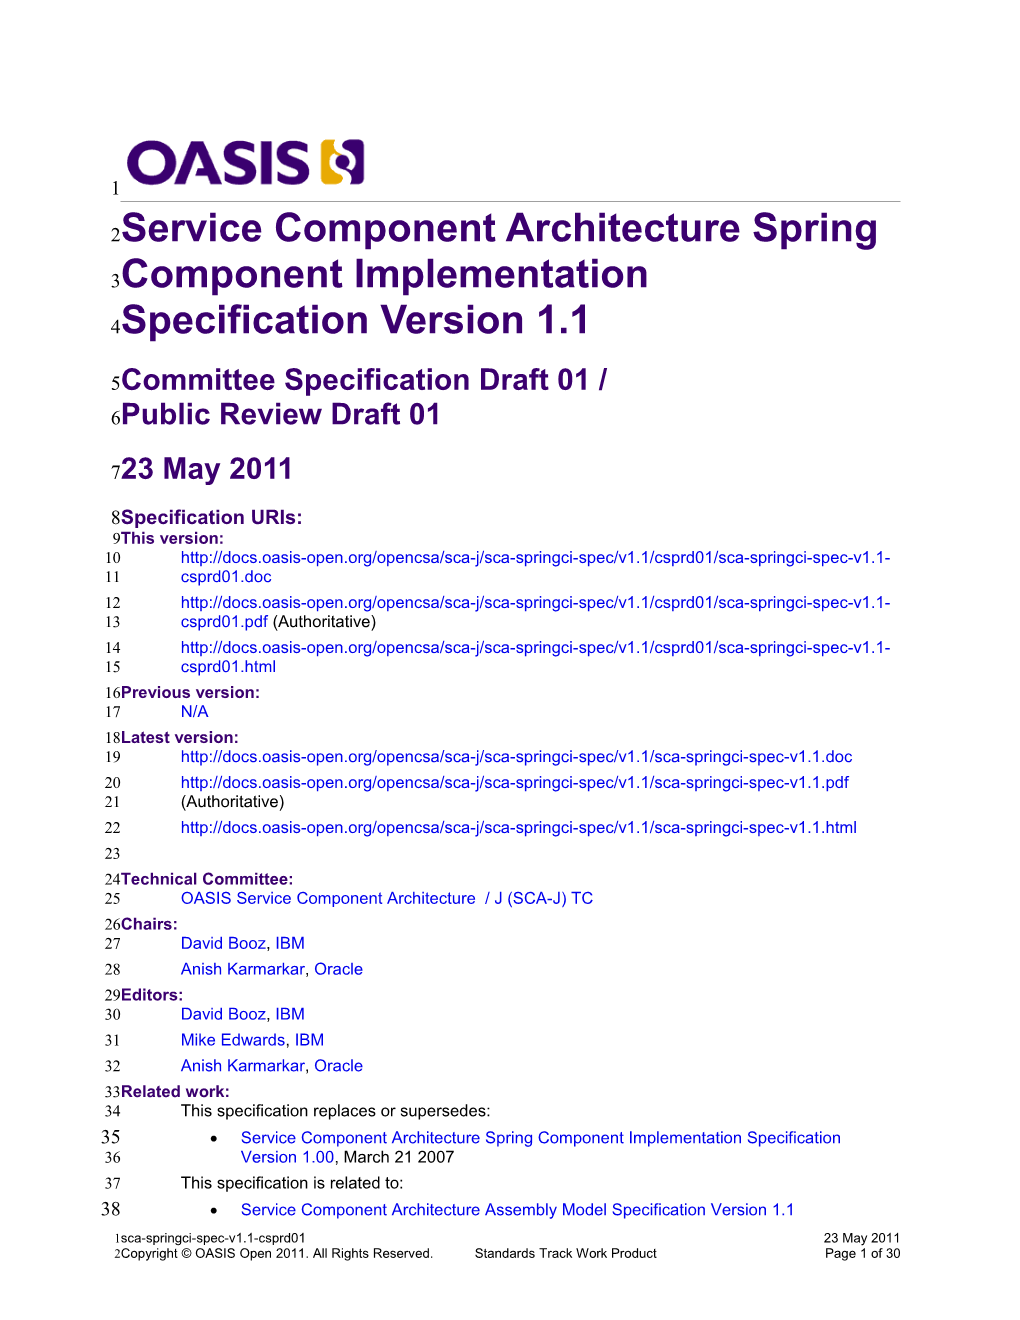 Service Component Architecture Spring Component Implementation Specification Version 1.1